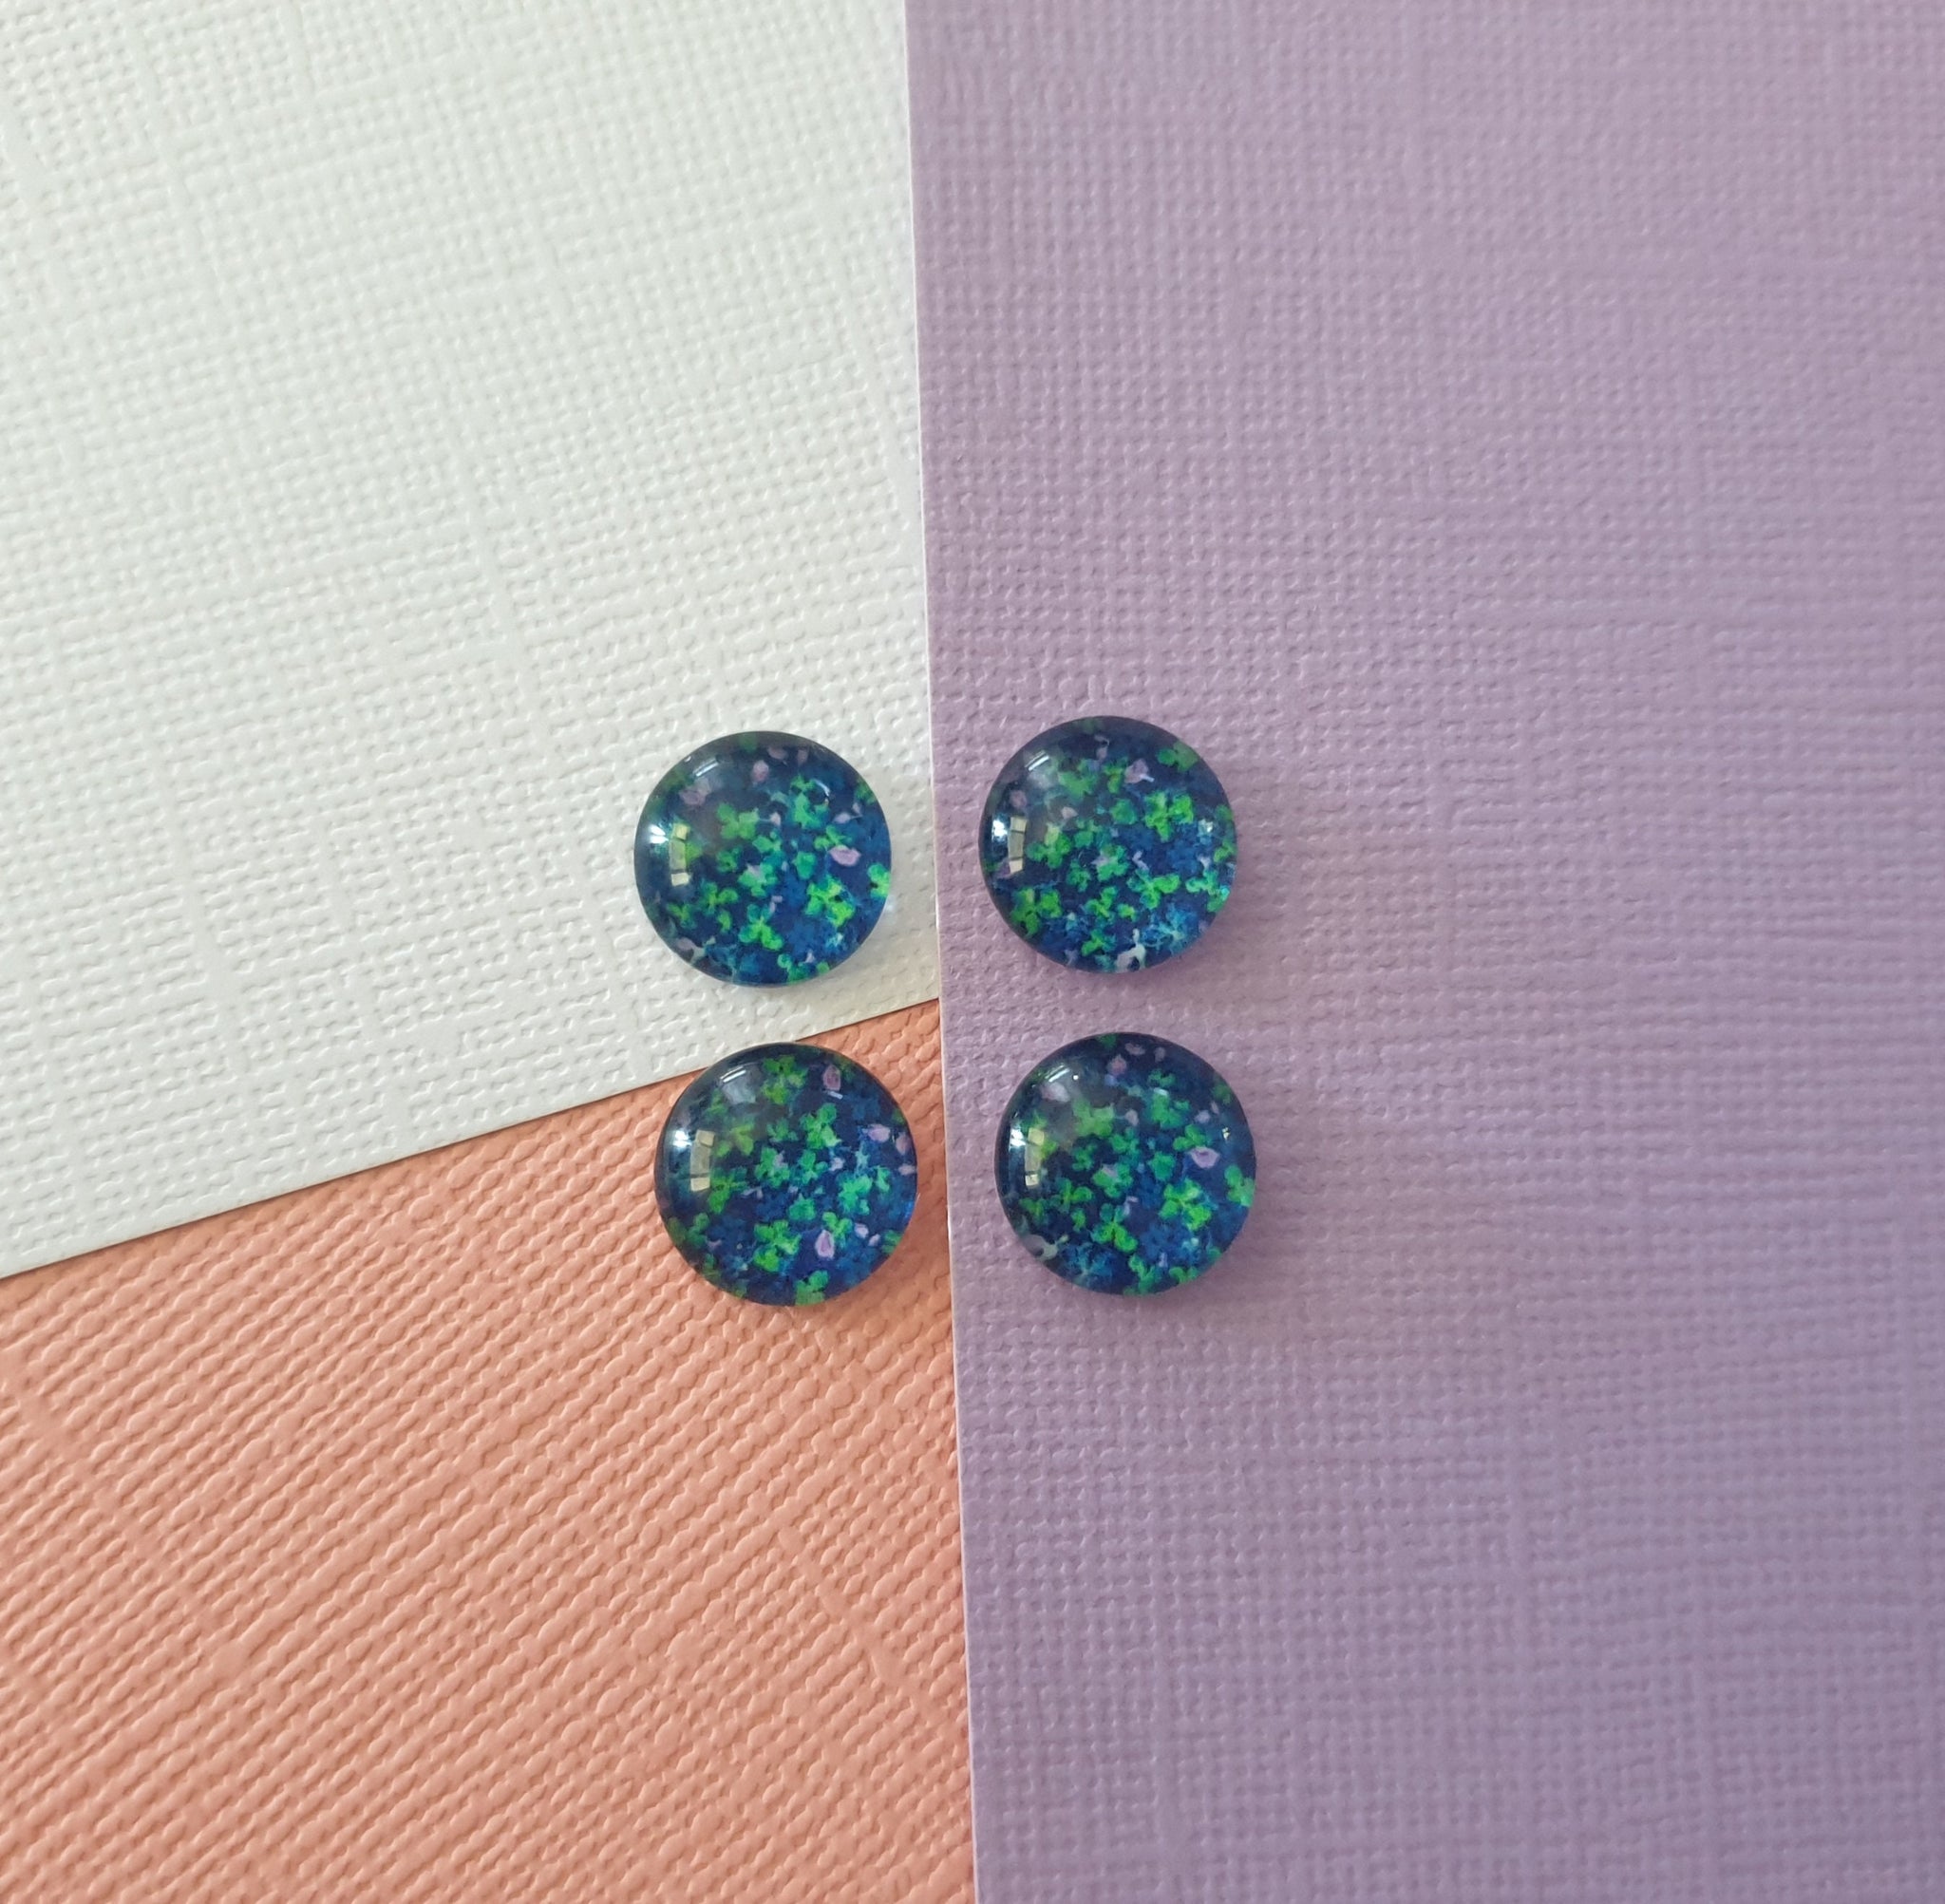 10pcs 12mm Handmade Cool Style Photo Glass Cabochons, blue green purple. butterfly look. Pattern Jewellery Accessories Supplies australia